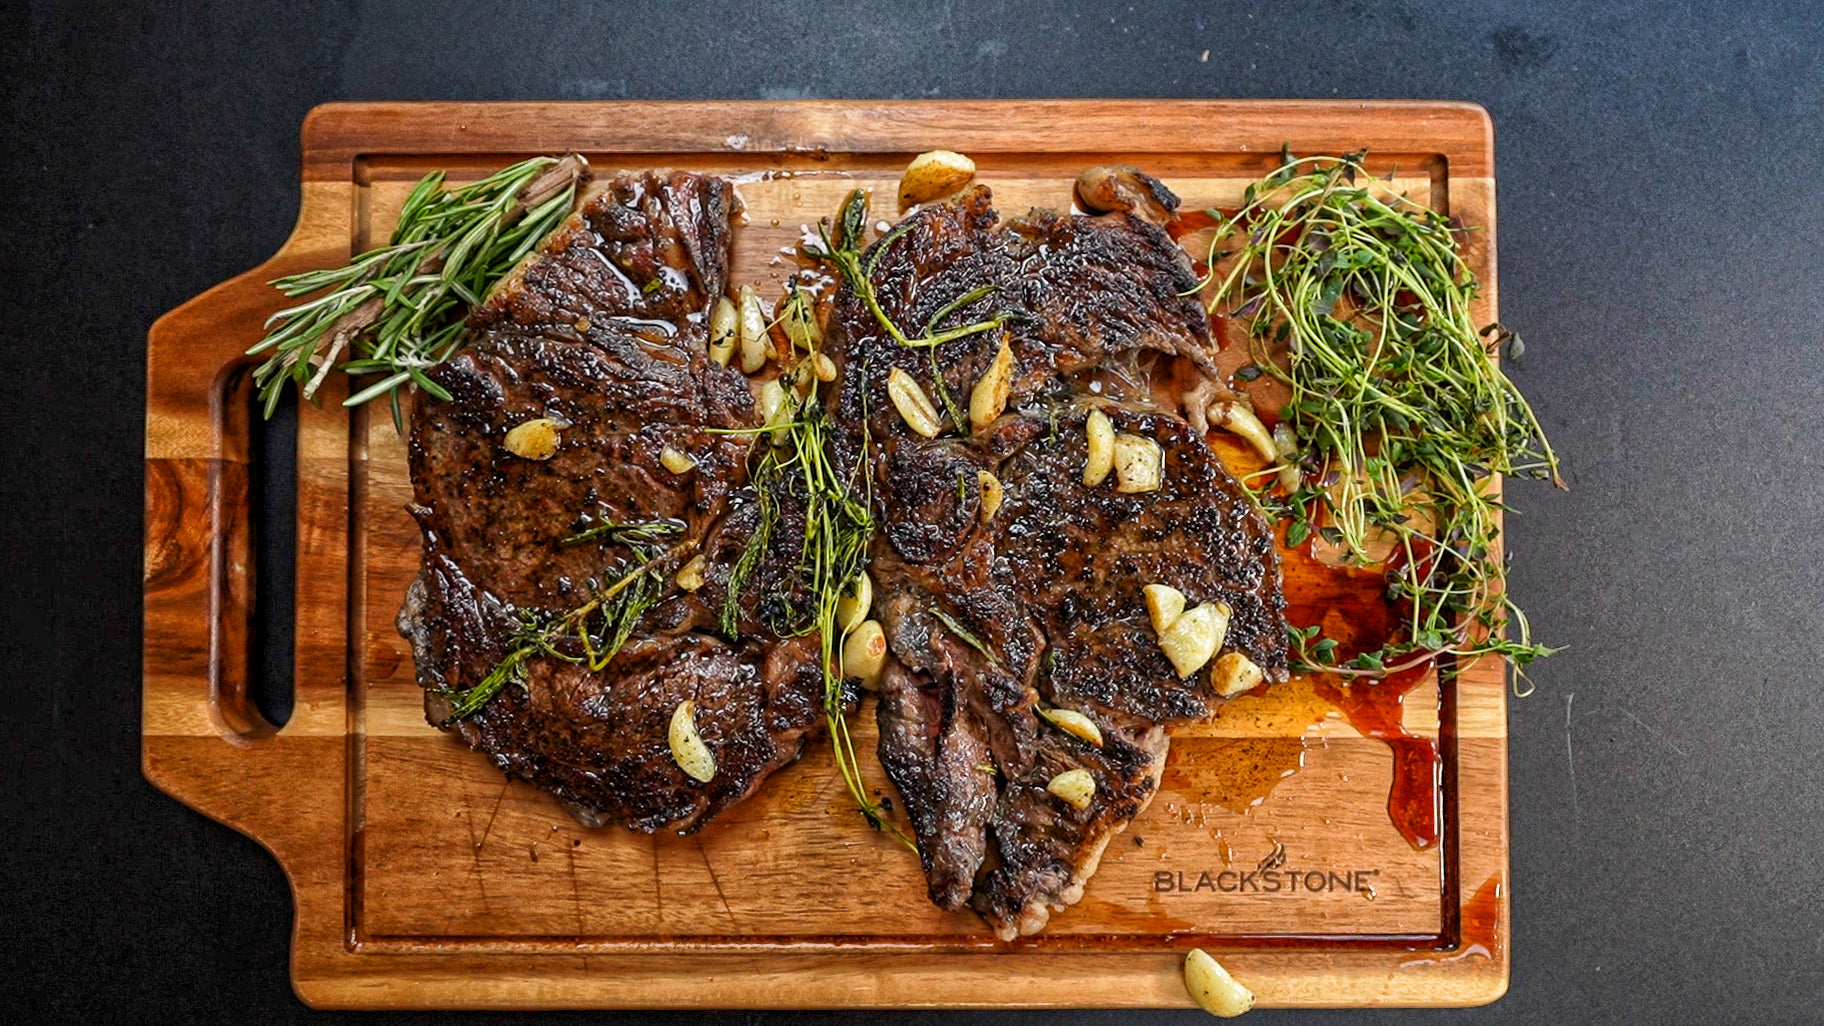 How To Cook Steak On A Blackstone Grill 